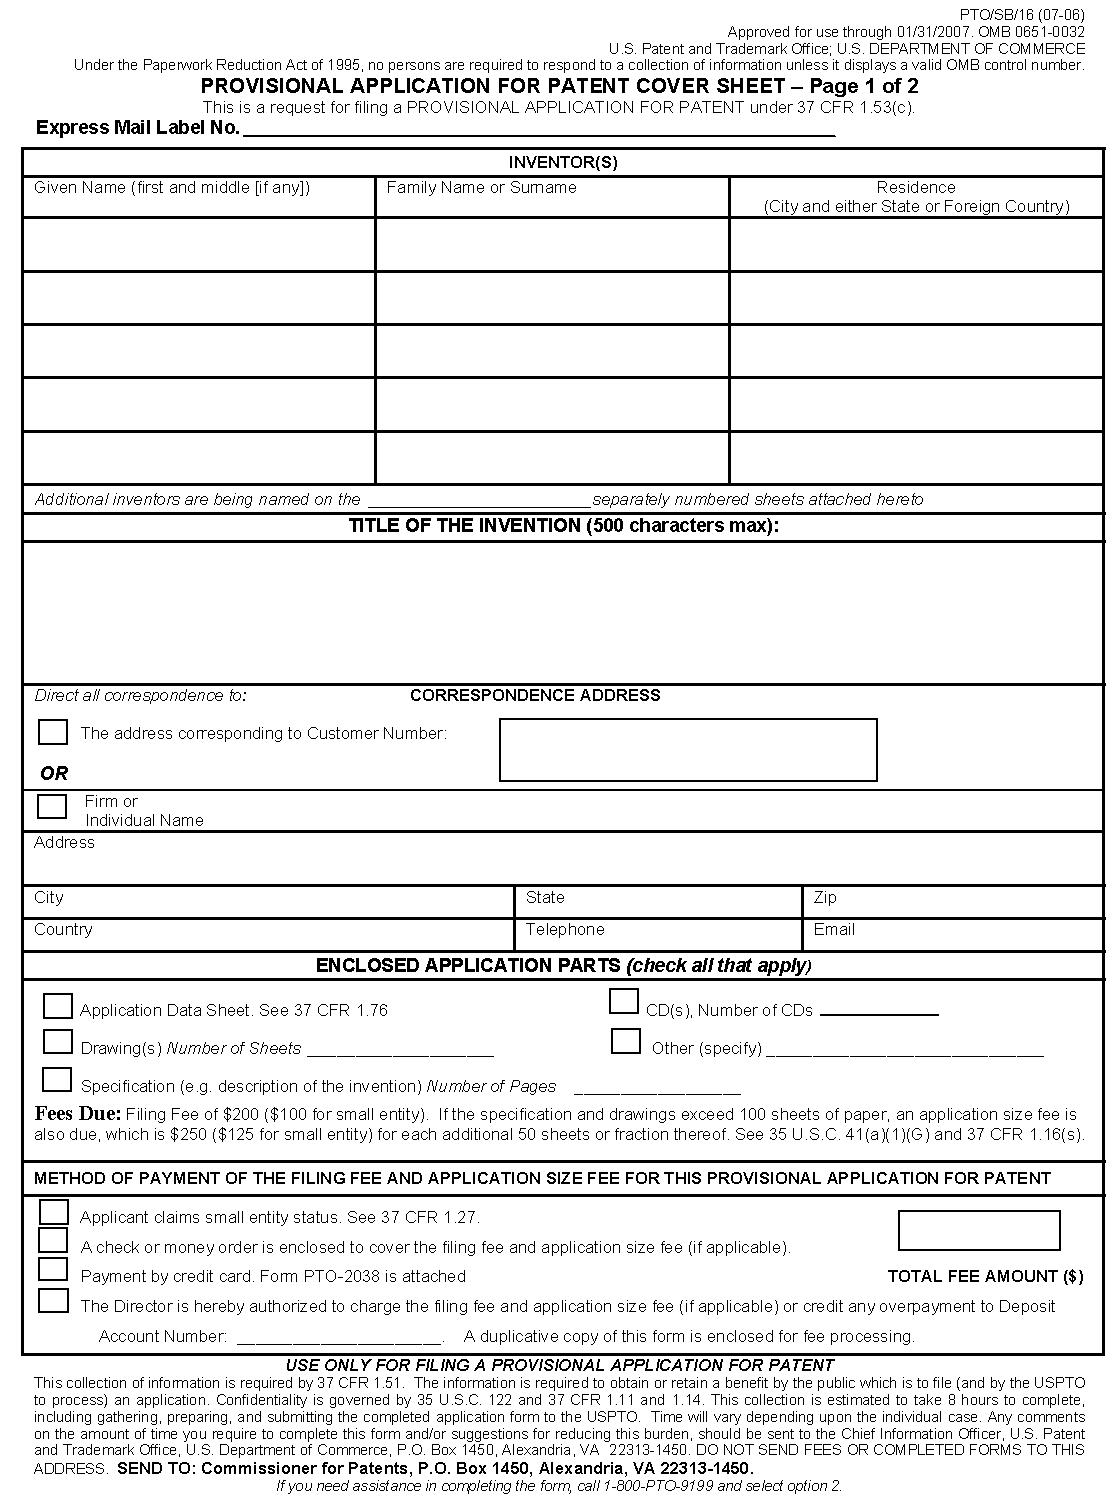 <b>Form PTO/SB/16. Provisional Application for Patent Cover Sheet</b>